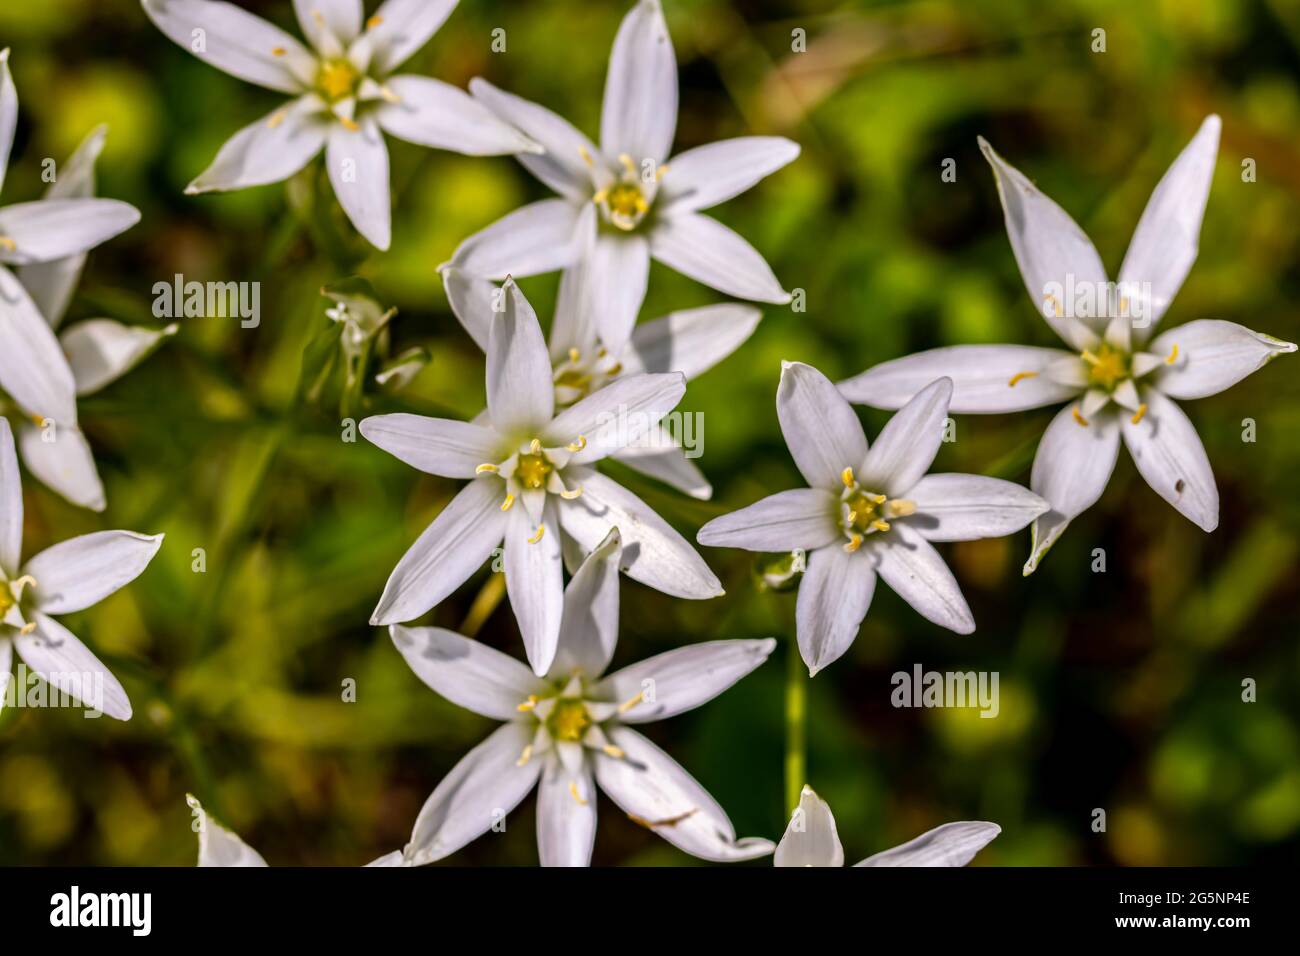 Ornithogalum flower growing in the garden Stock Photo